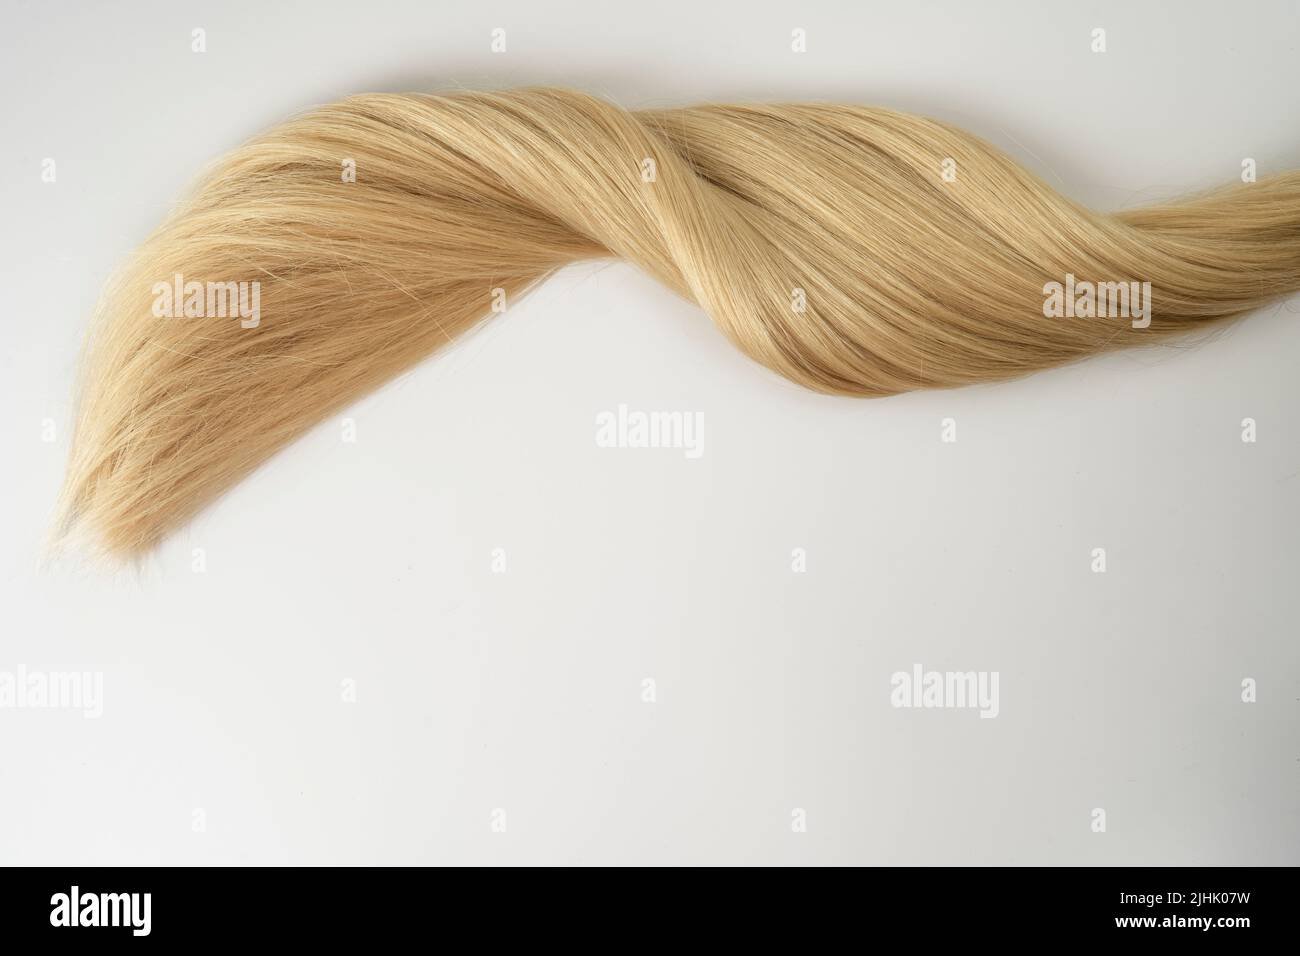 A strand of blonde hair lying on a white background Stock Photo